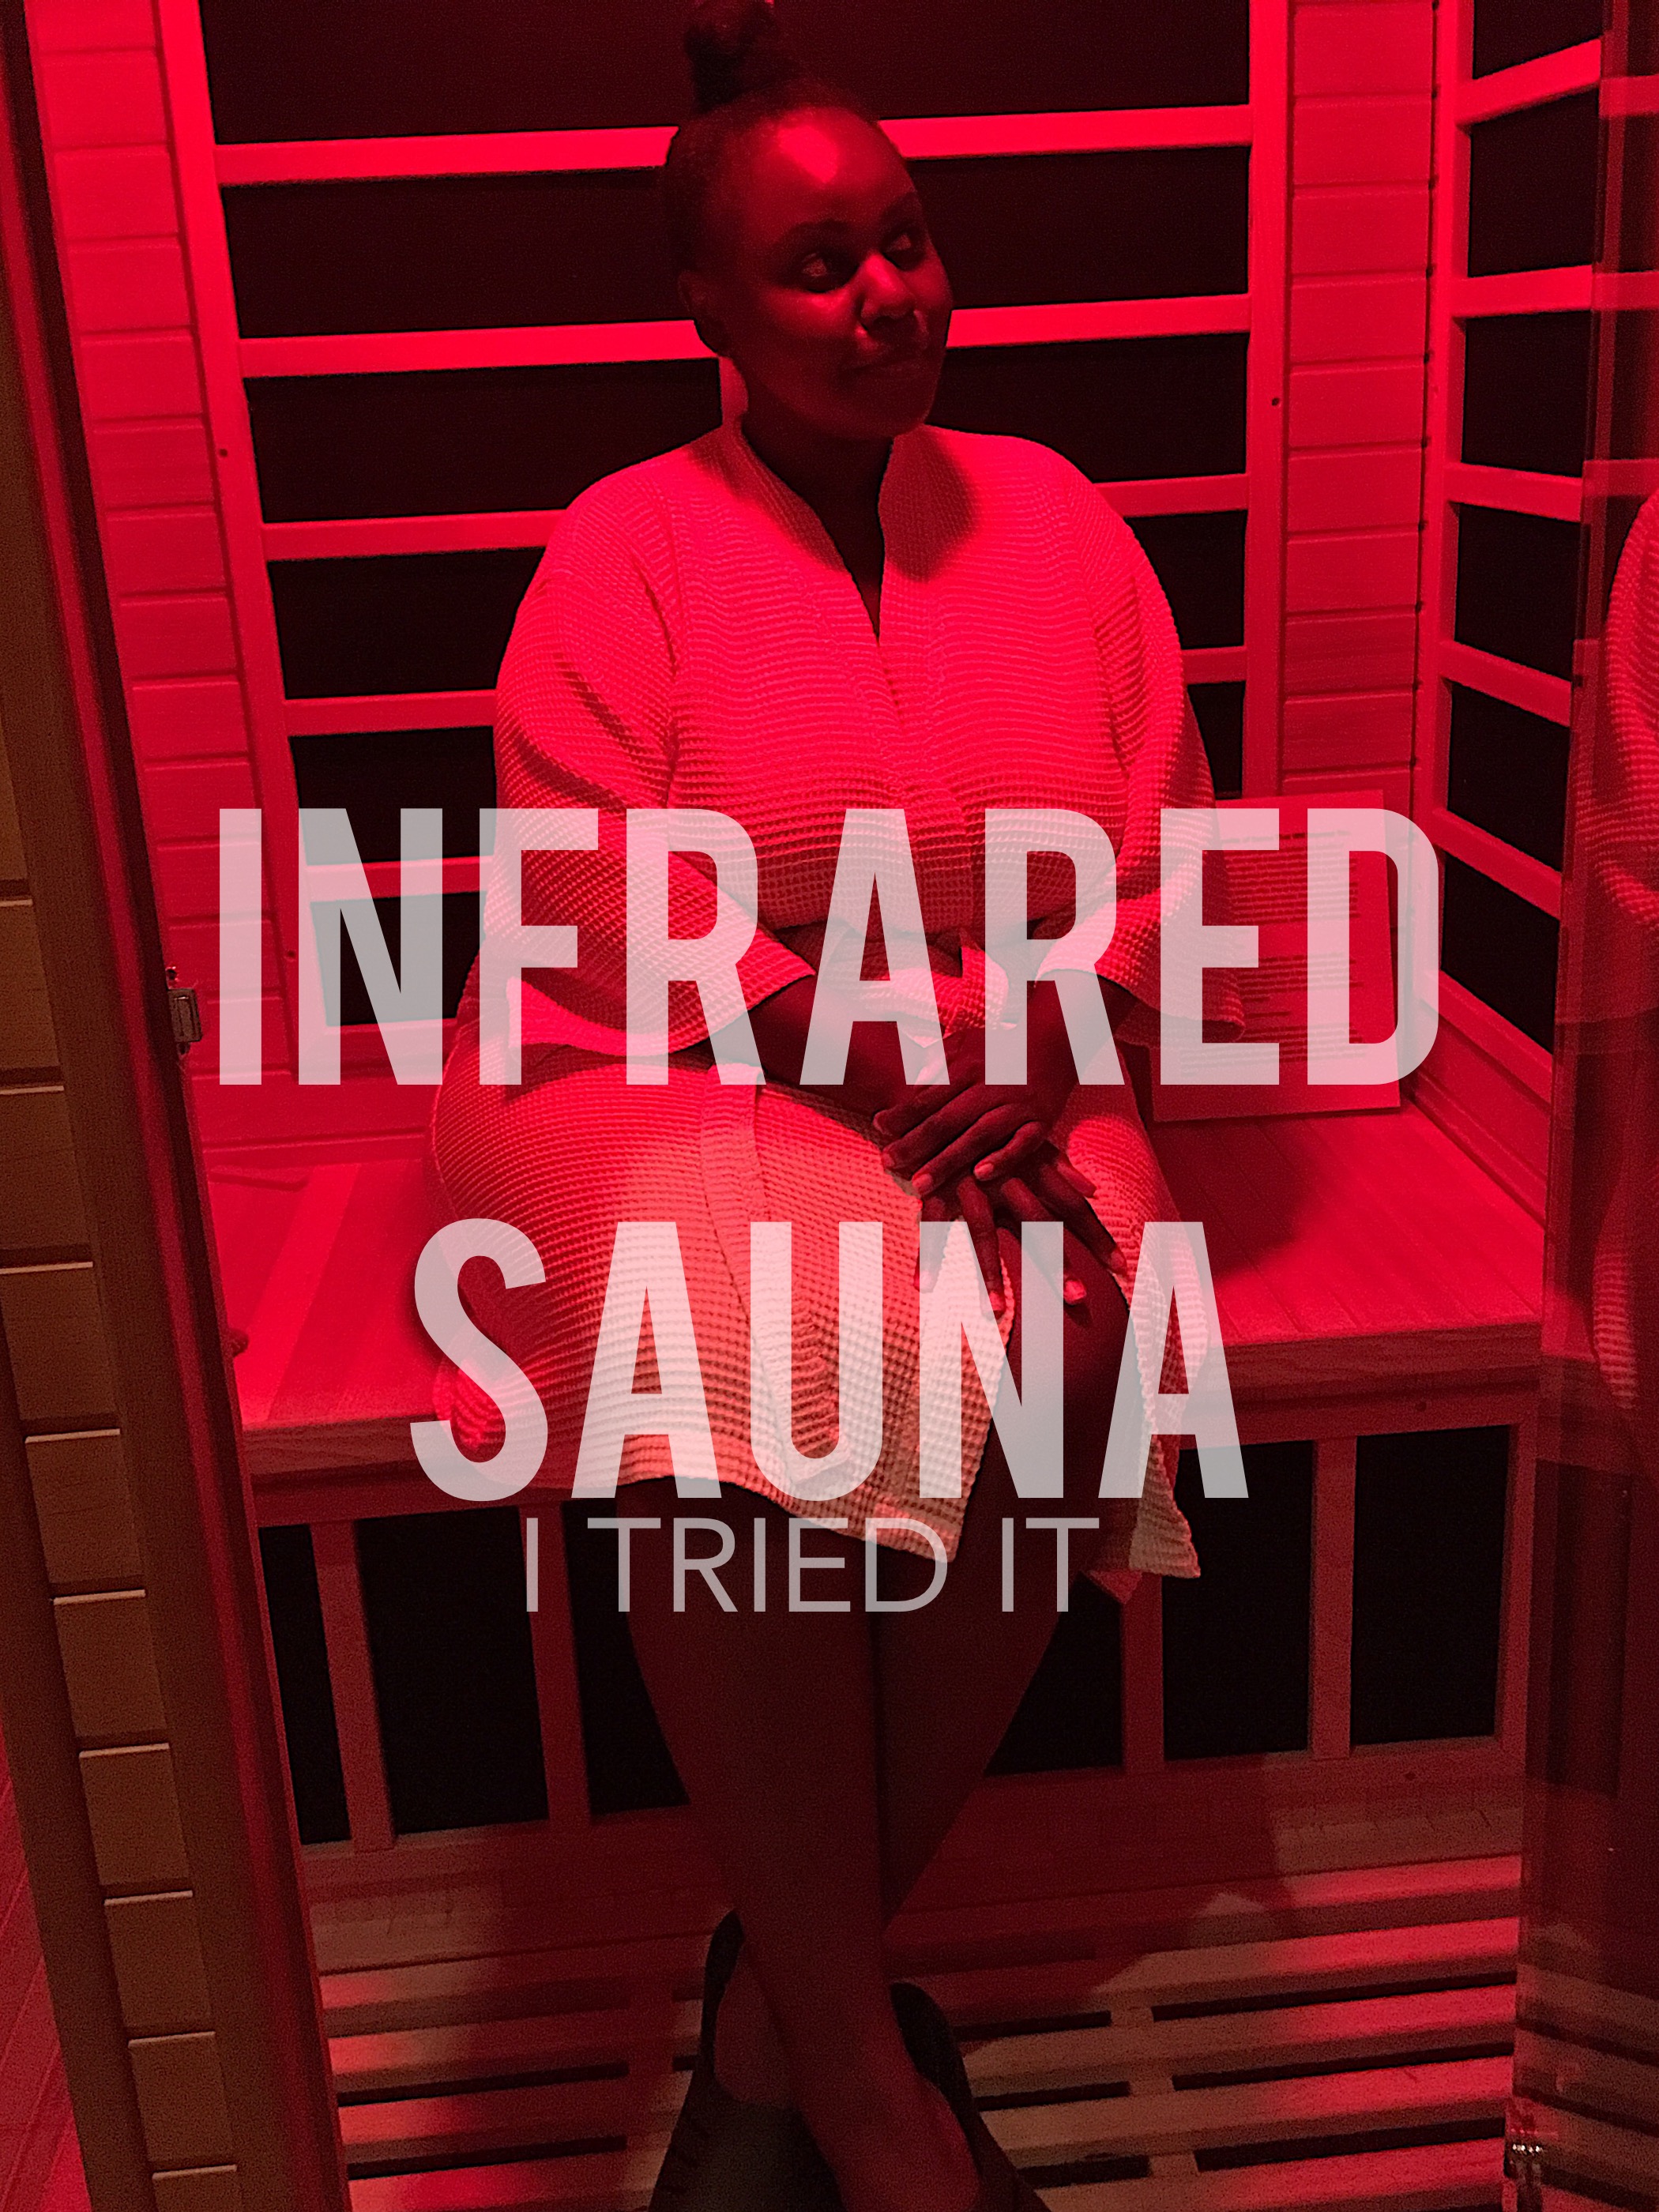 Infrared sauna houston spa day with the girls ideas steam bath, ideas for your birthday